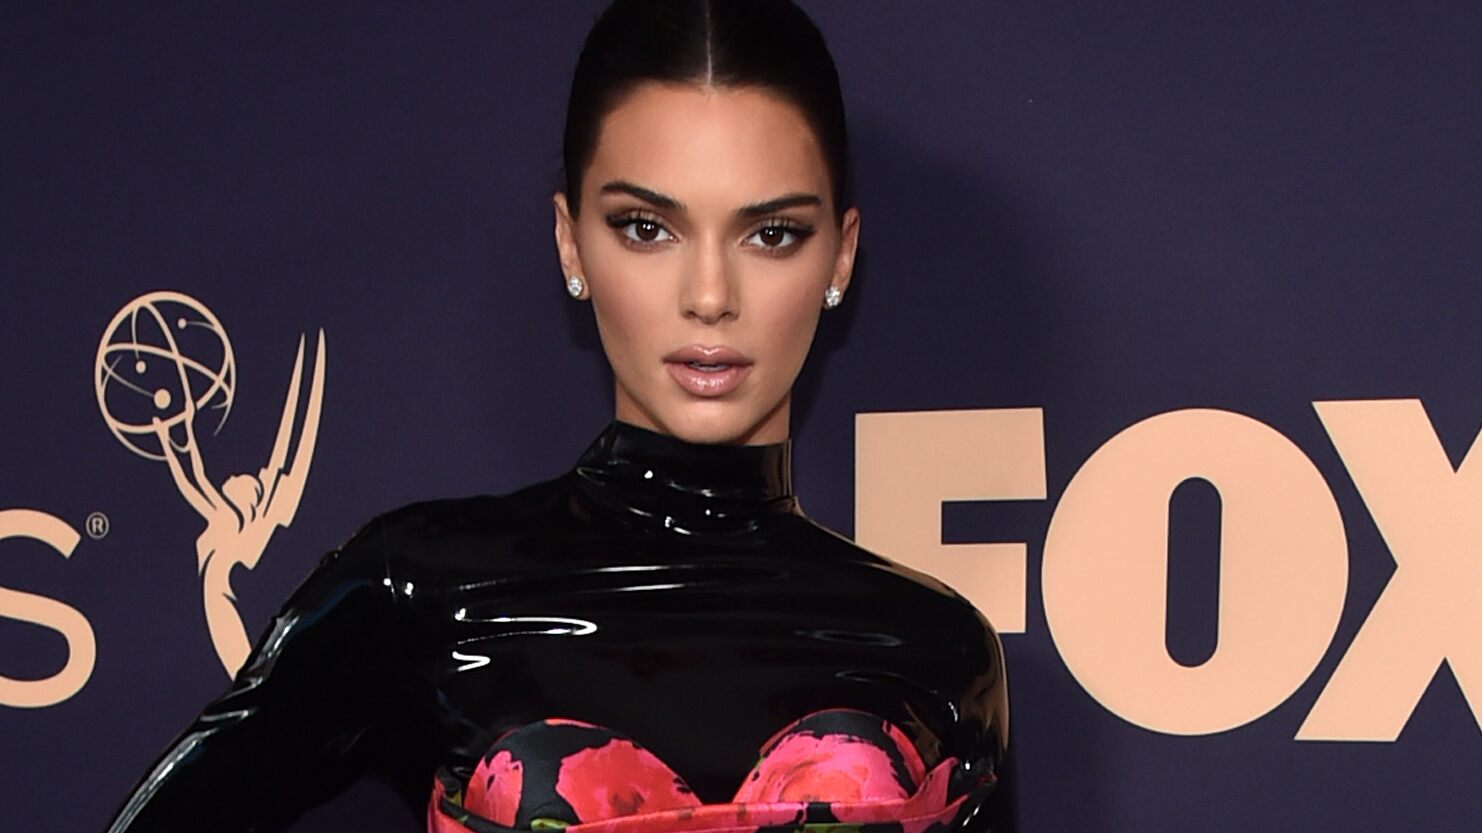 Kendall Jenner says she’s ‘a stoner’: ‘No one knows that’